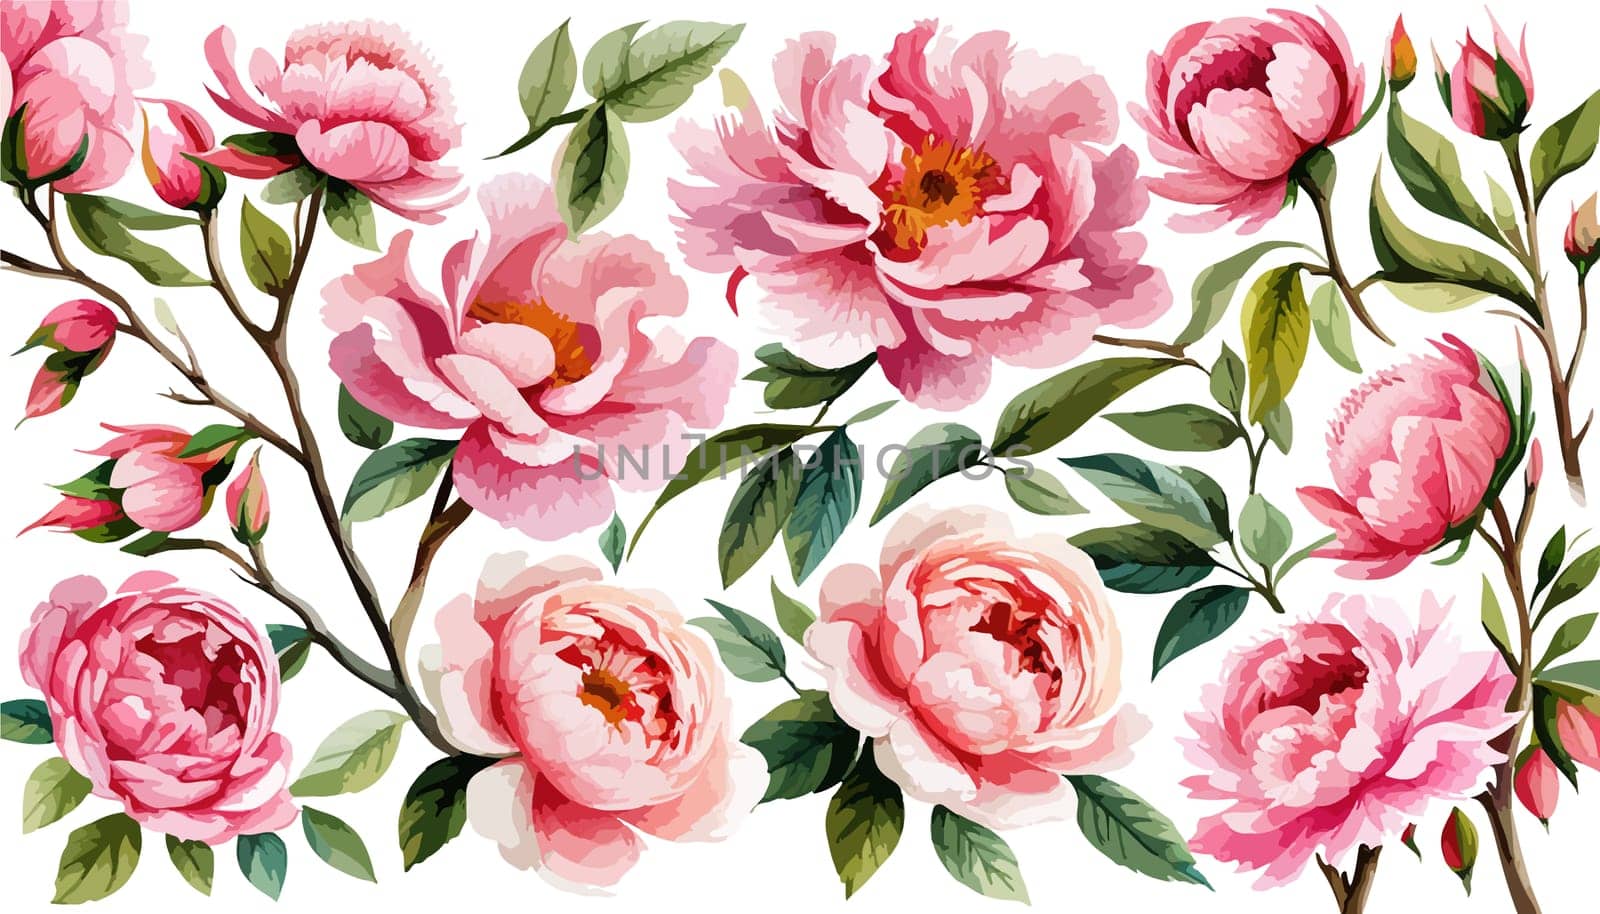 Painted floral elements set. Watercolor botanical illustration of peony flowers and leaves. Natural objects isolated on white background illustration